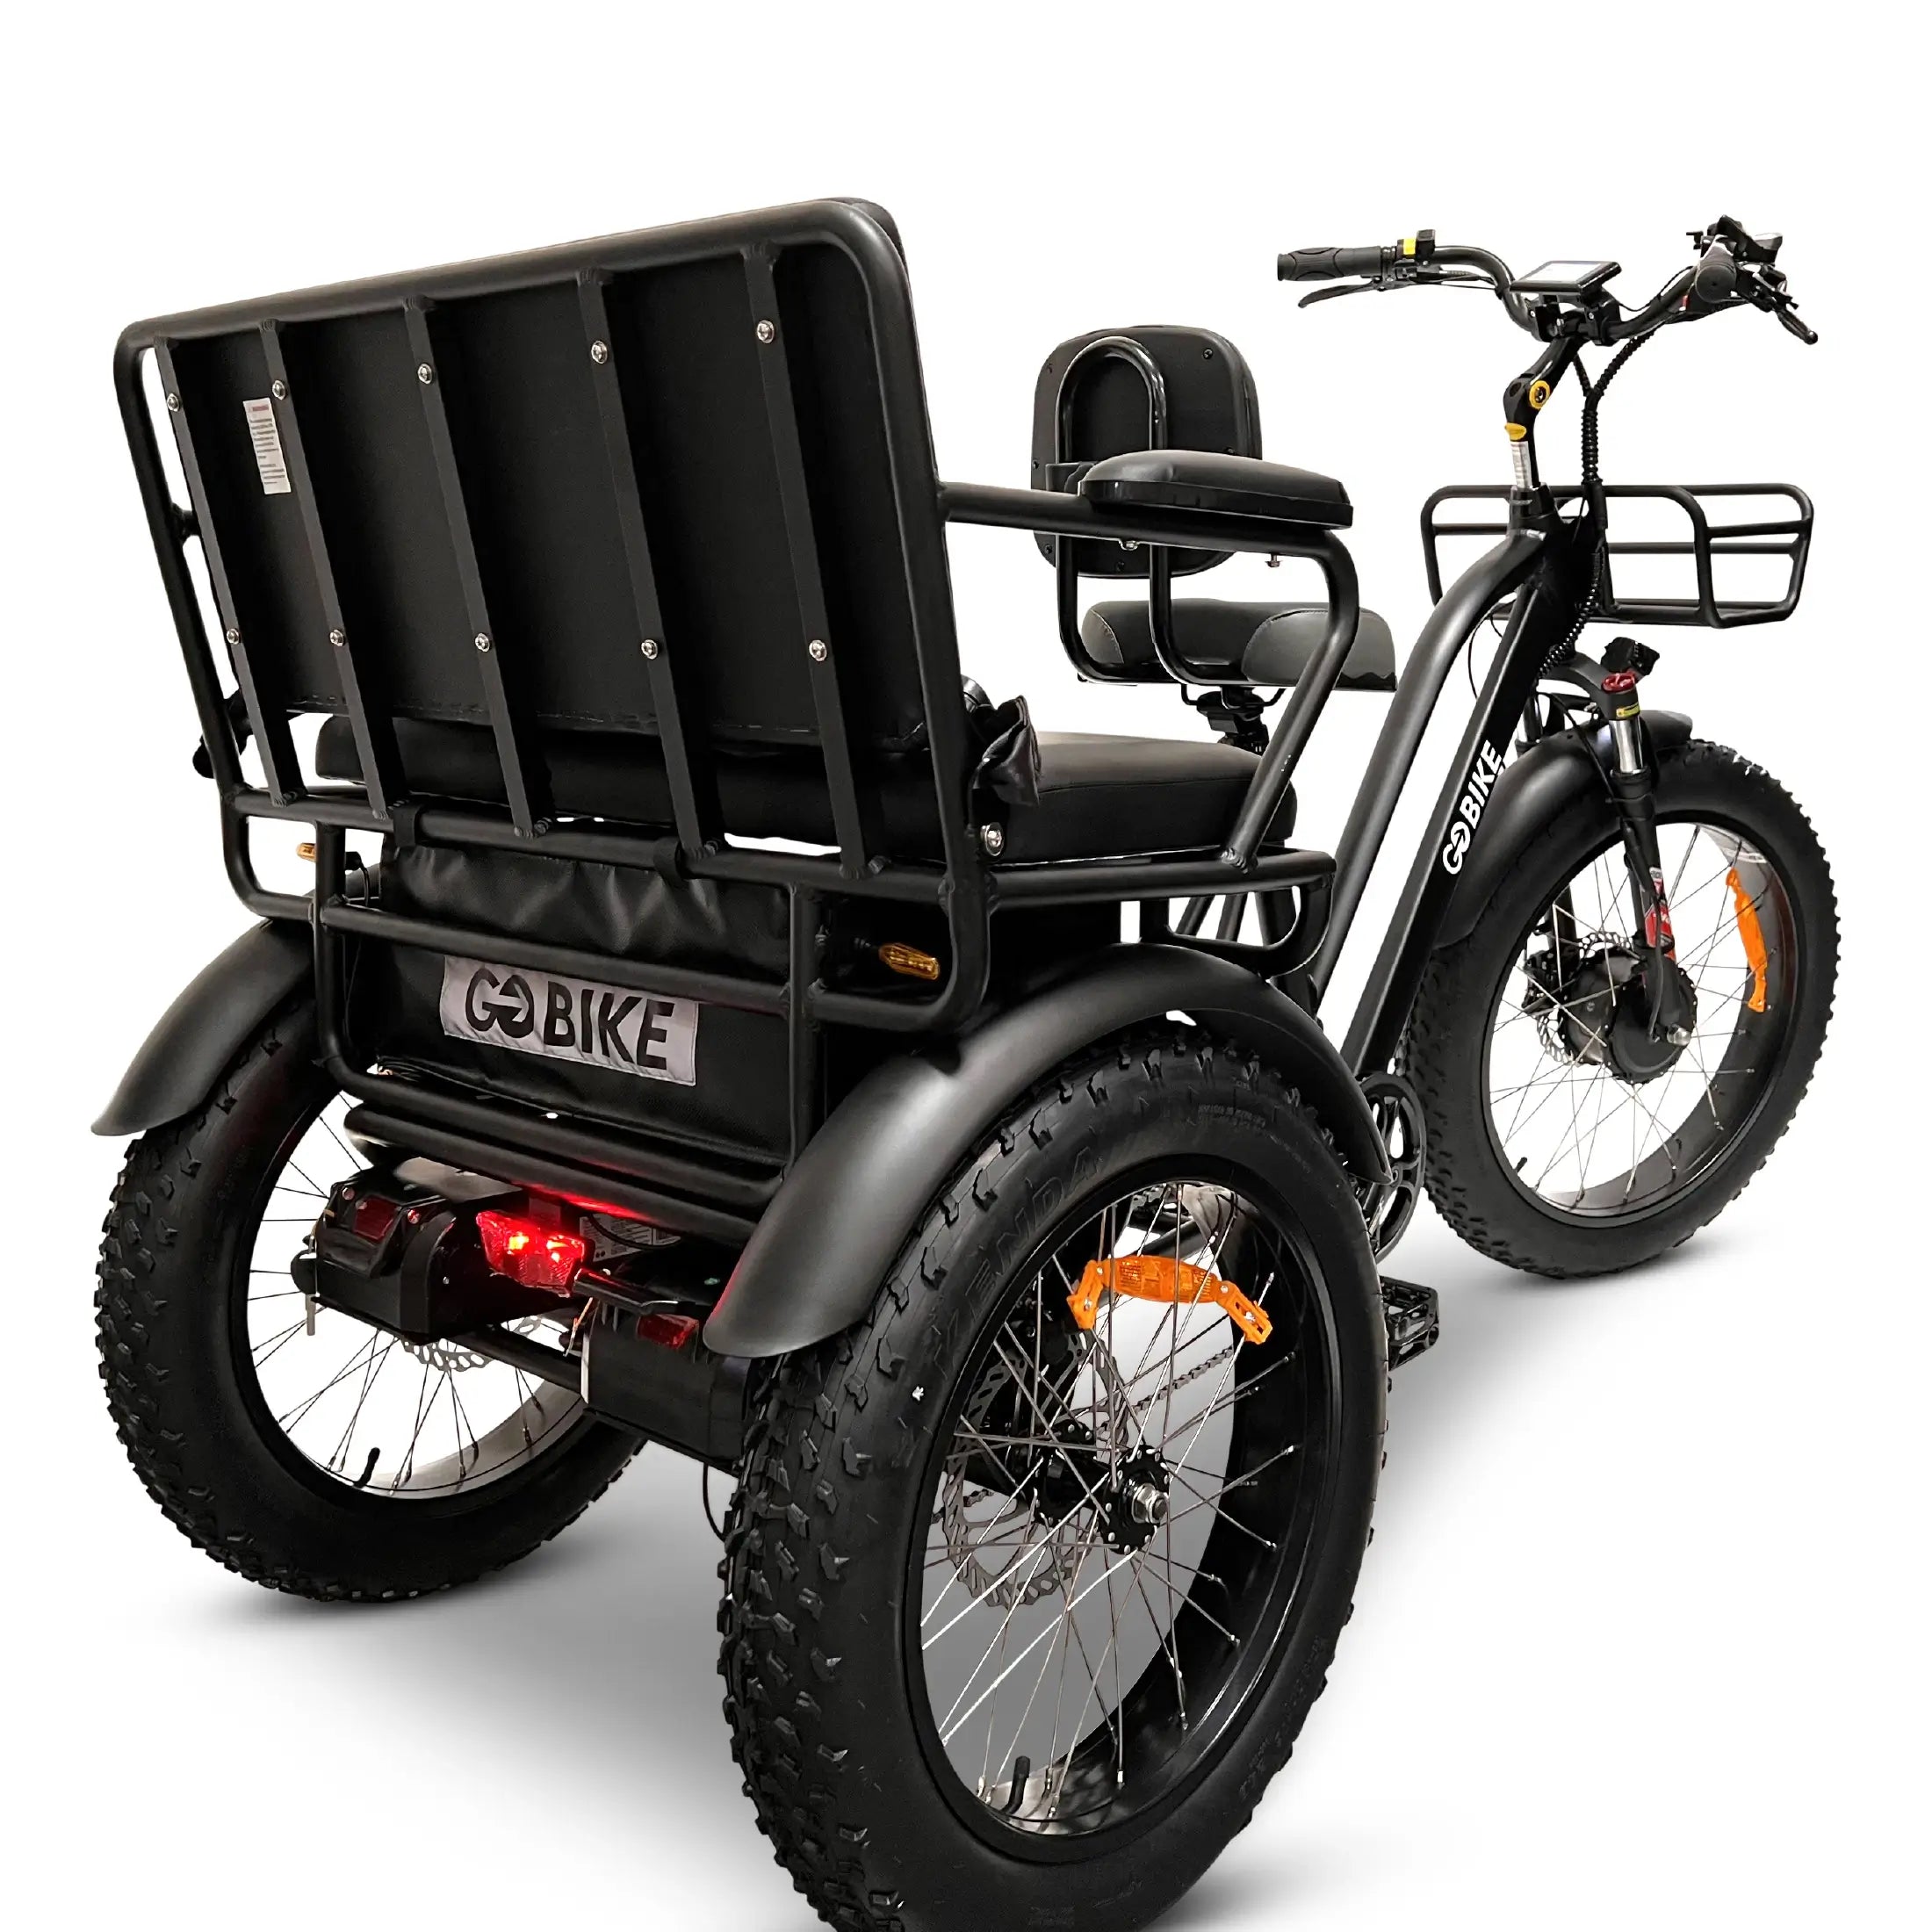 FORTE Electric Tricycle with Rear Seat